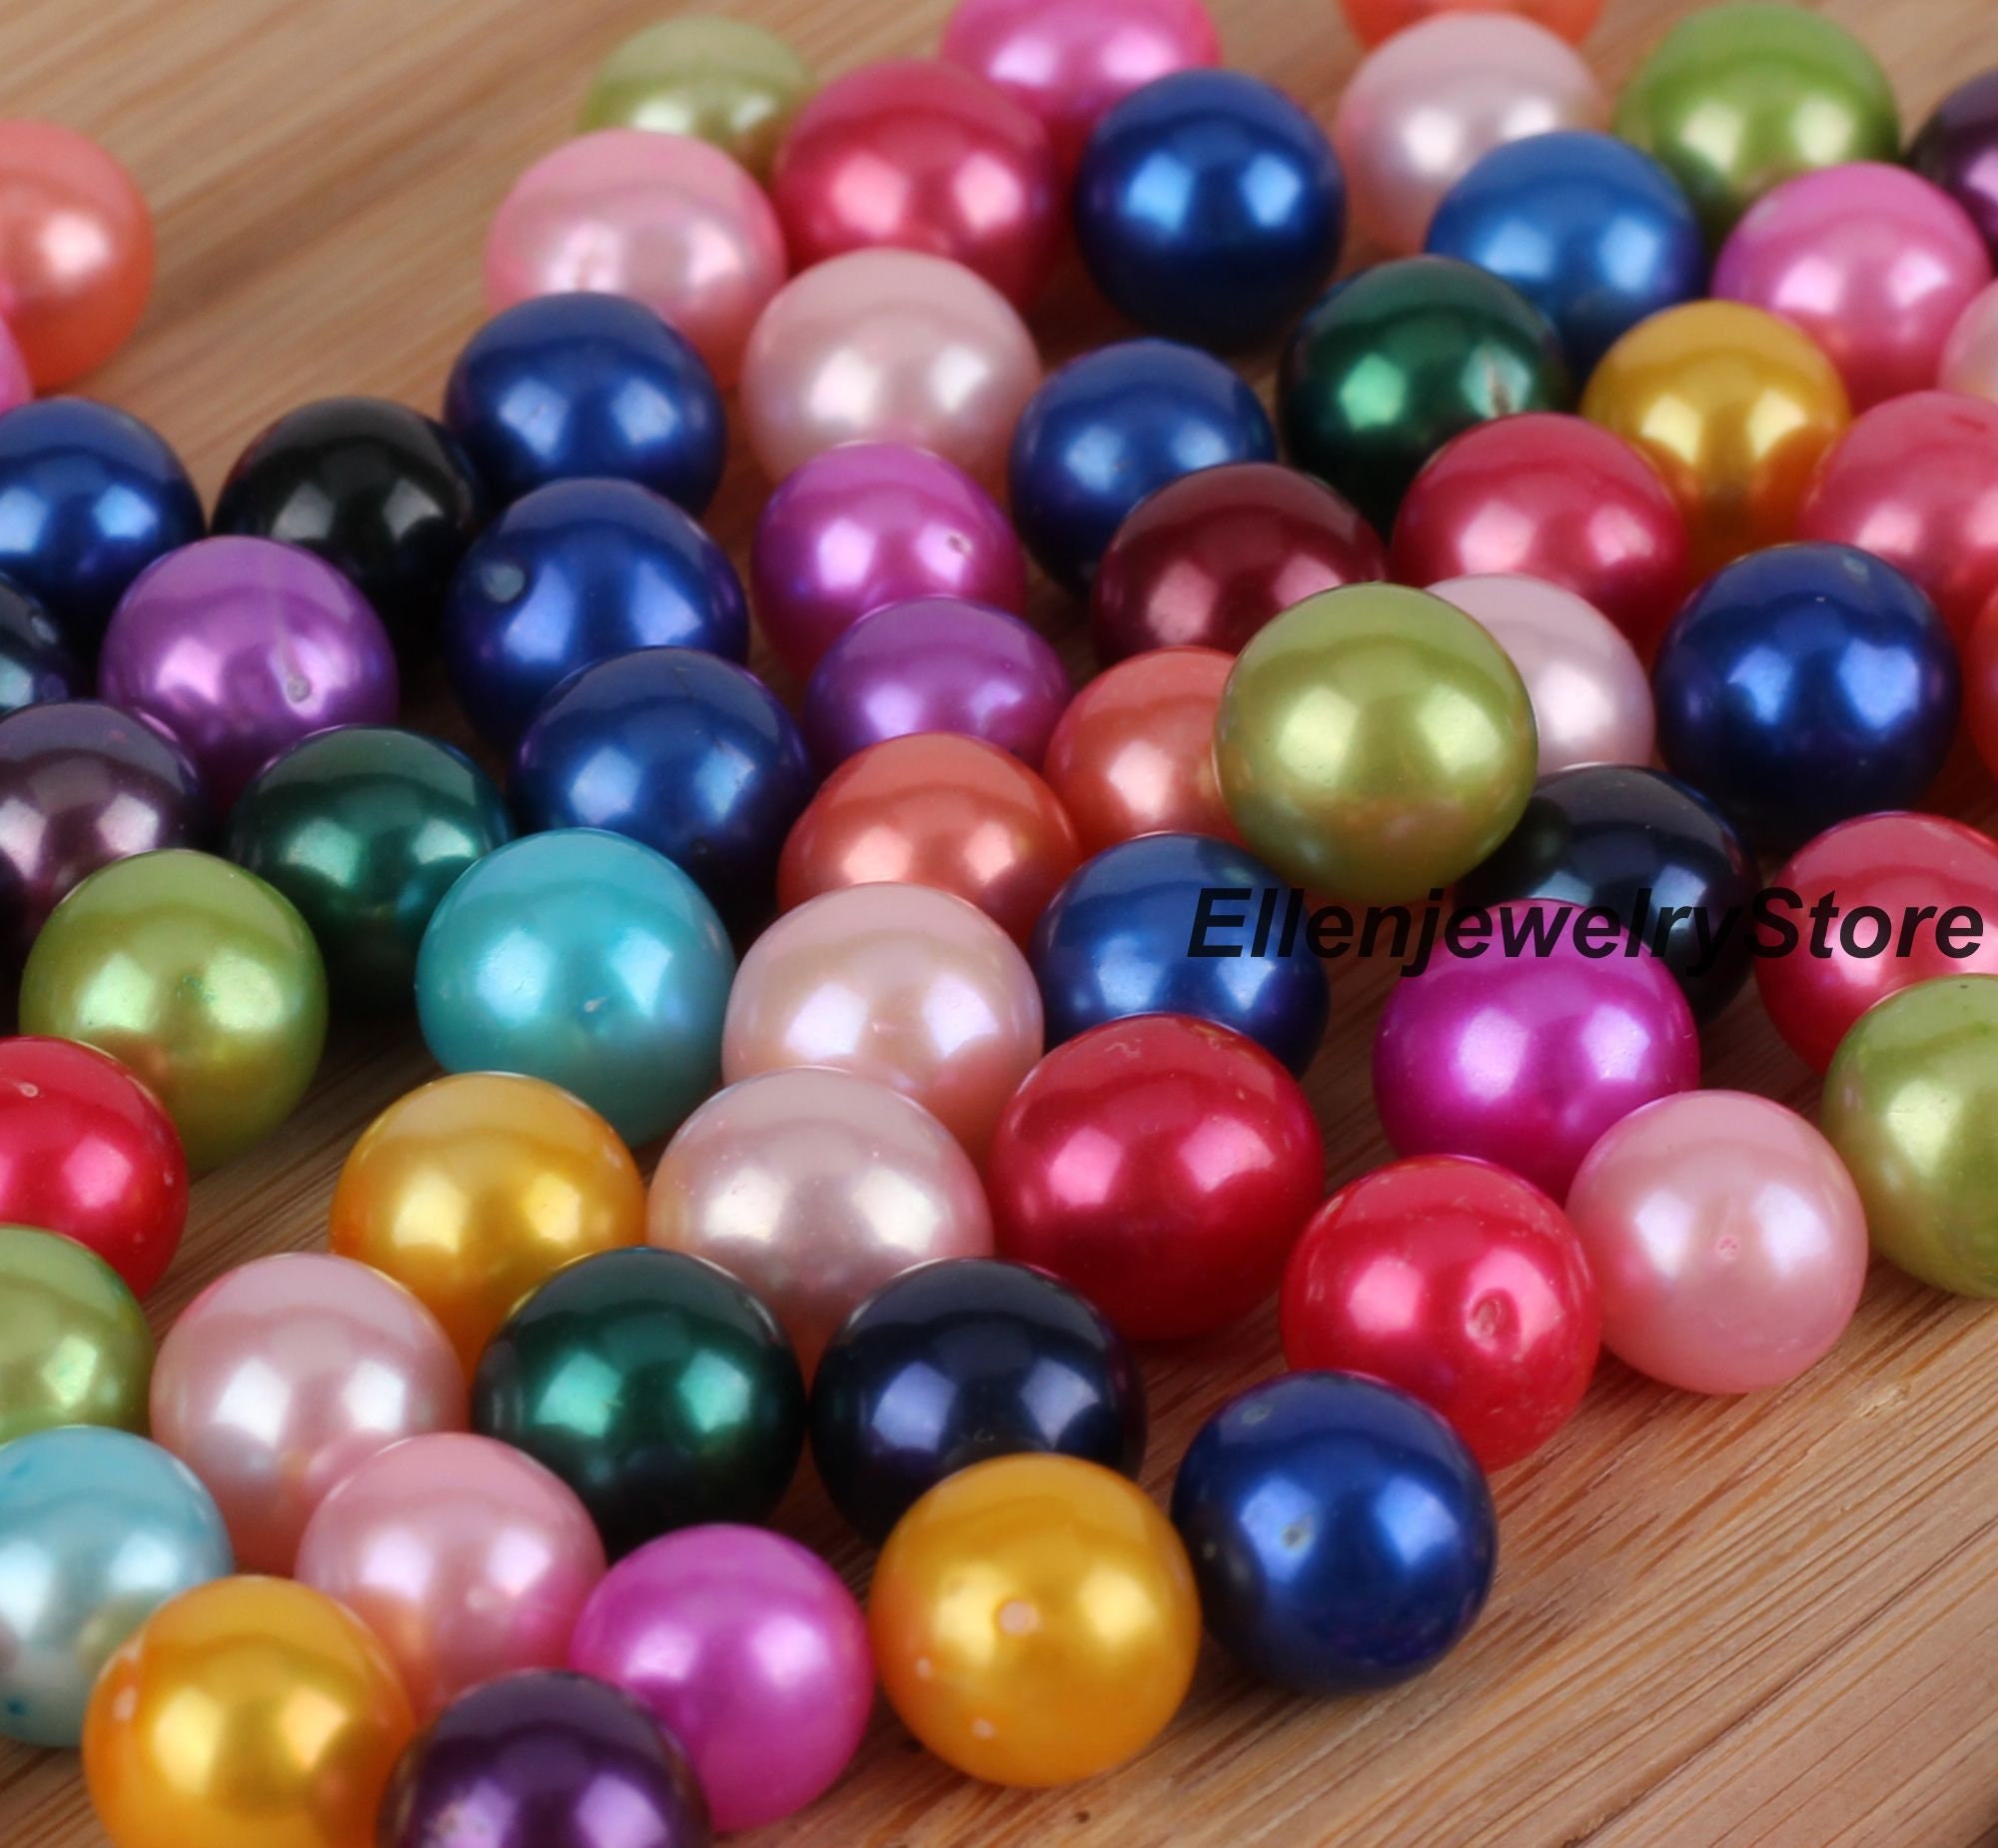 XSEINO Pearl Beads，3200PCS 8mm and 6mm，46 Colors Multicolor Pearl Beads  Loose Pearls for Crafts with Holes for Jewelry Making, Small Pearl Filler